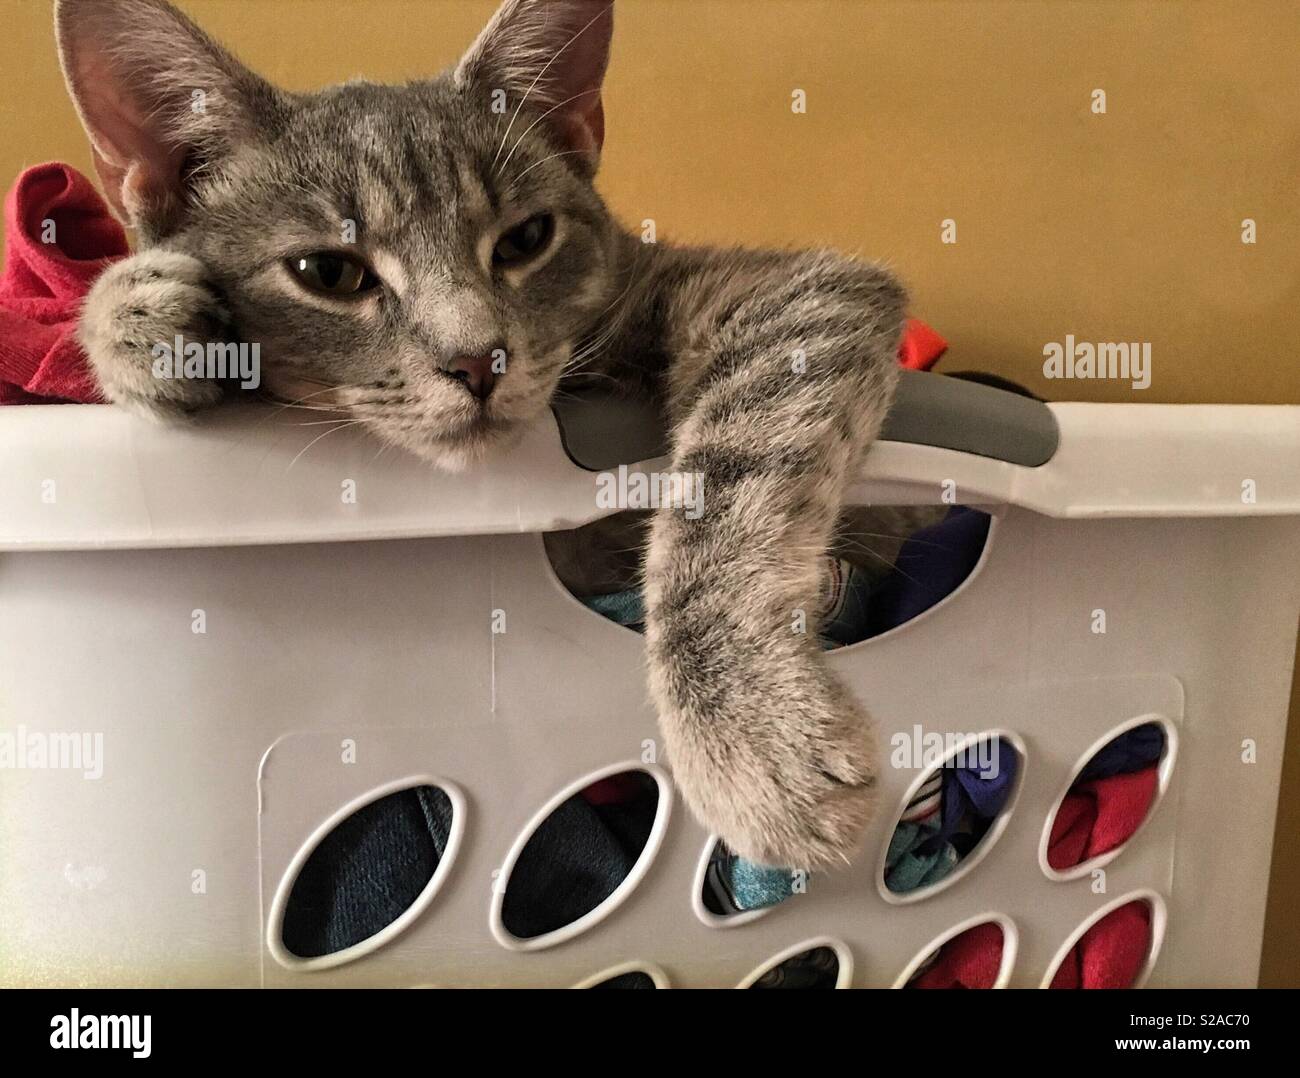 Bored cat stares from laundry basket. Stock Photo